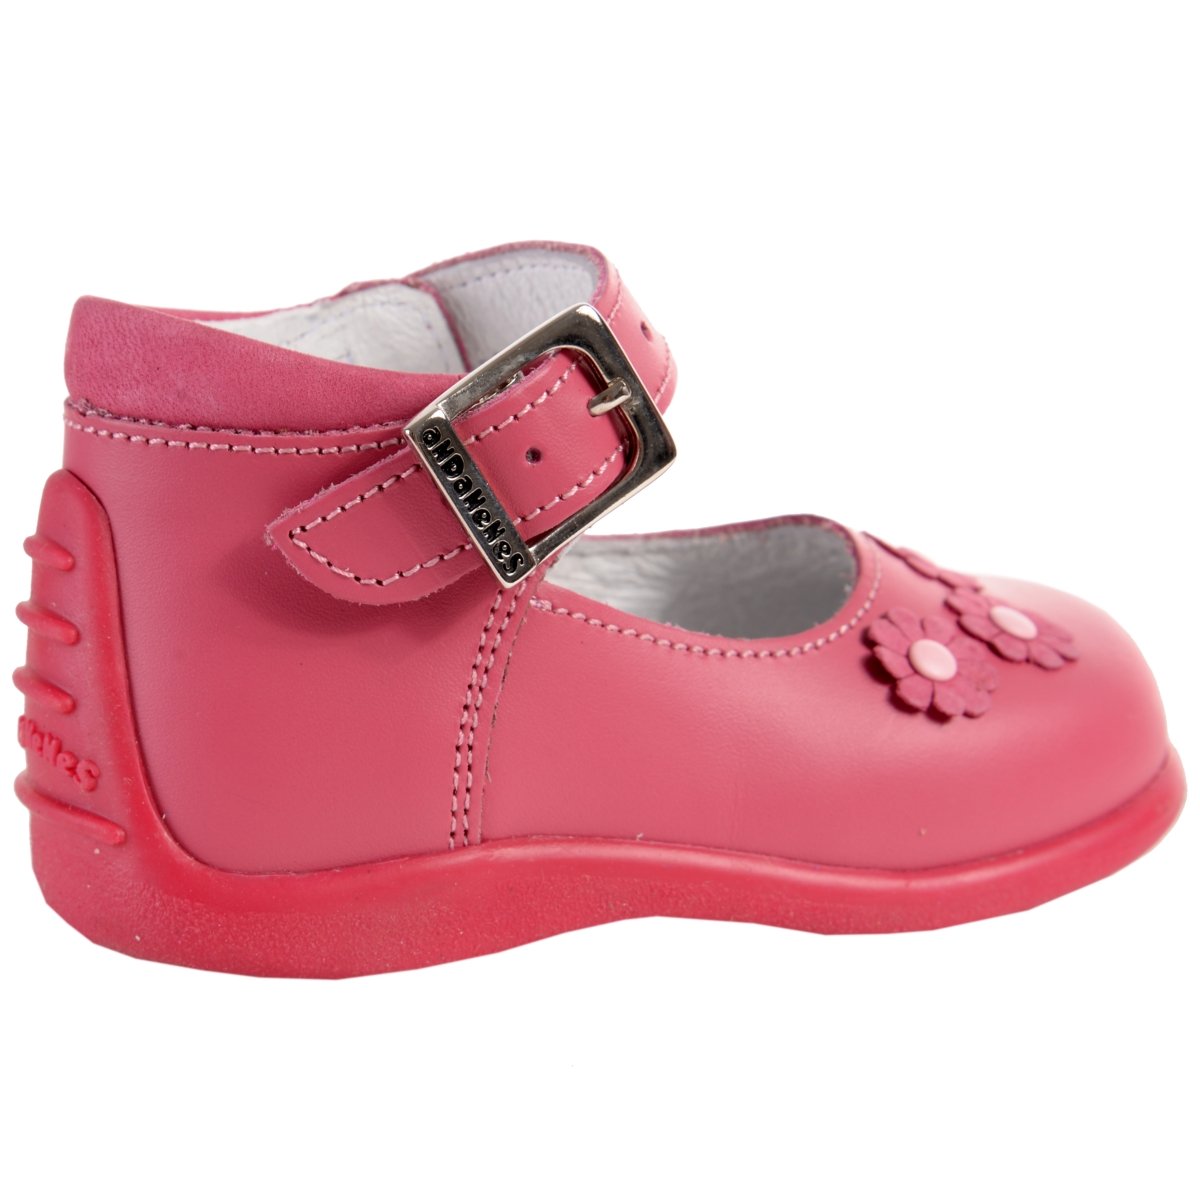 Zapato Mary Janne Flores 12-15 Mod. 6047A50